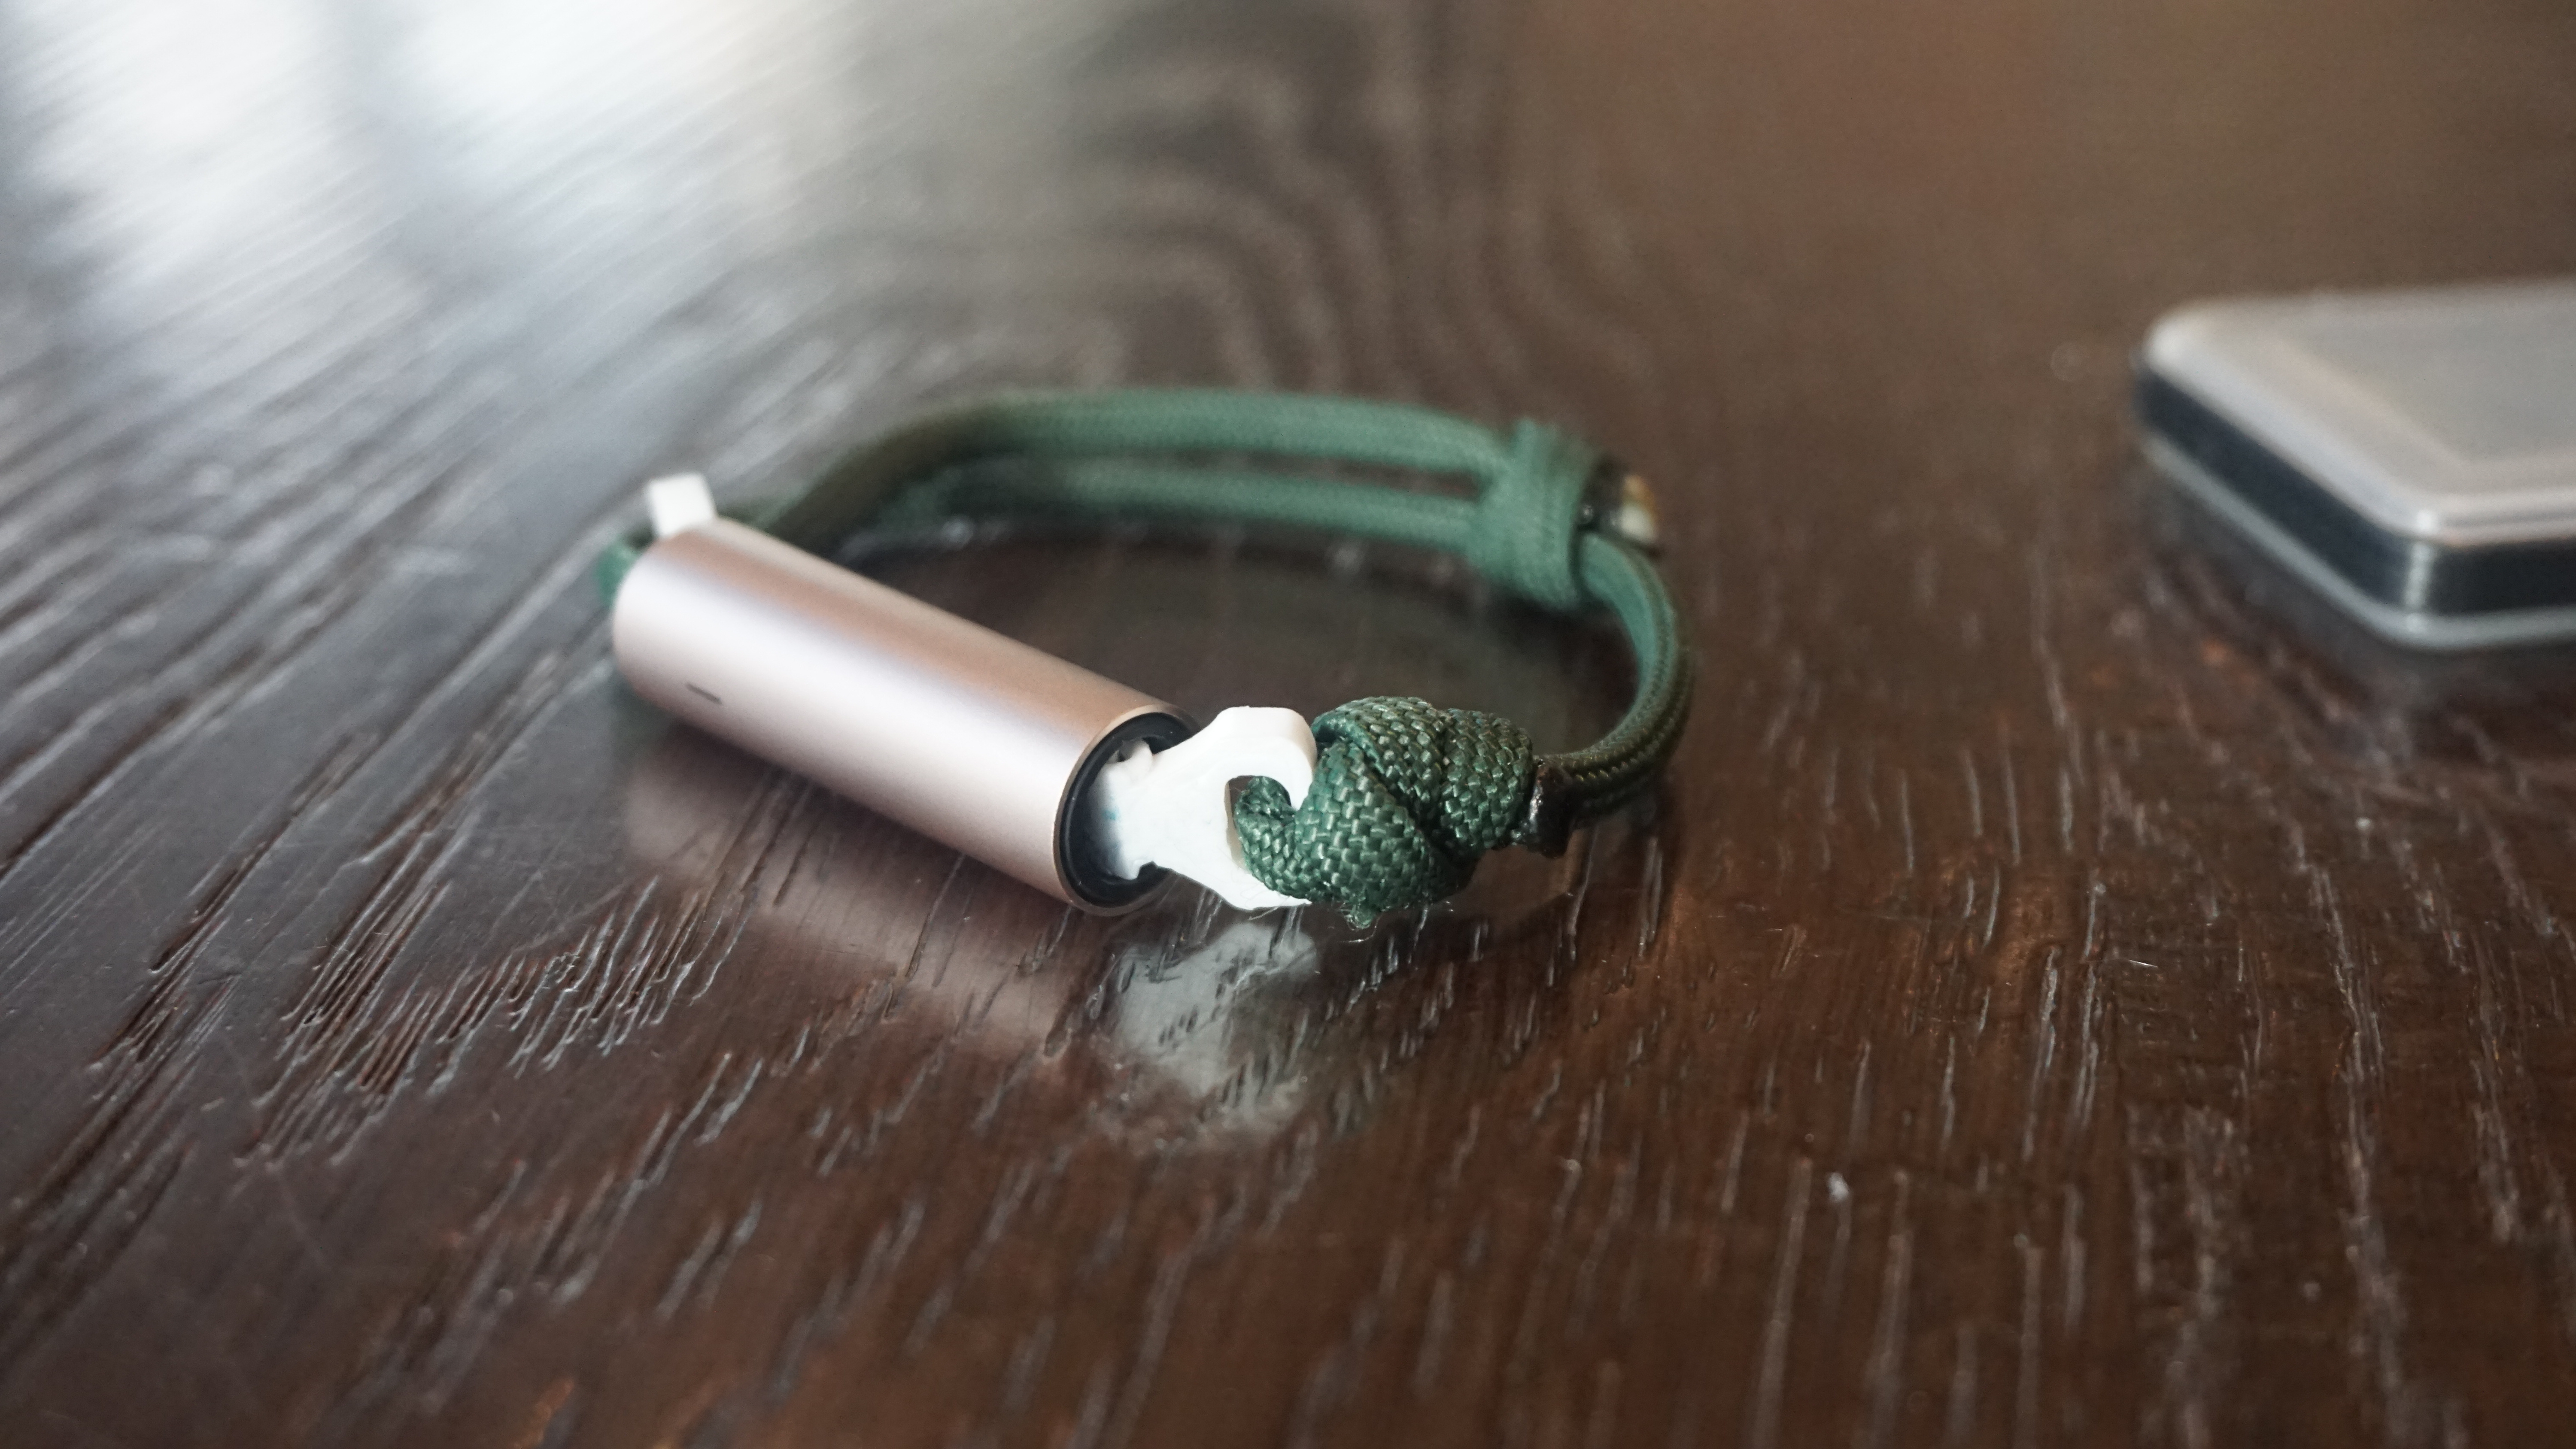 3D Printed Misfit Ray Link Band by IantheMinimalist | Pinshape